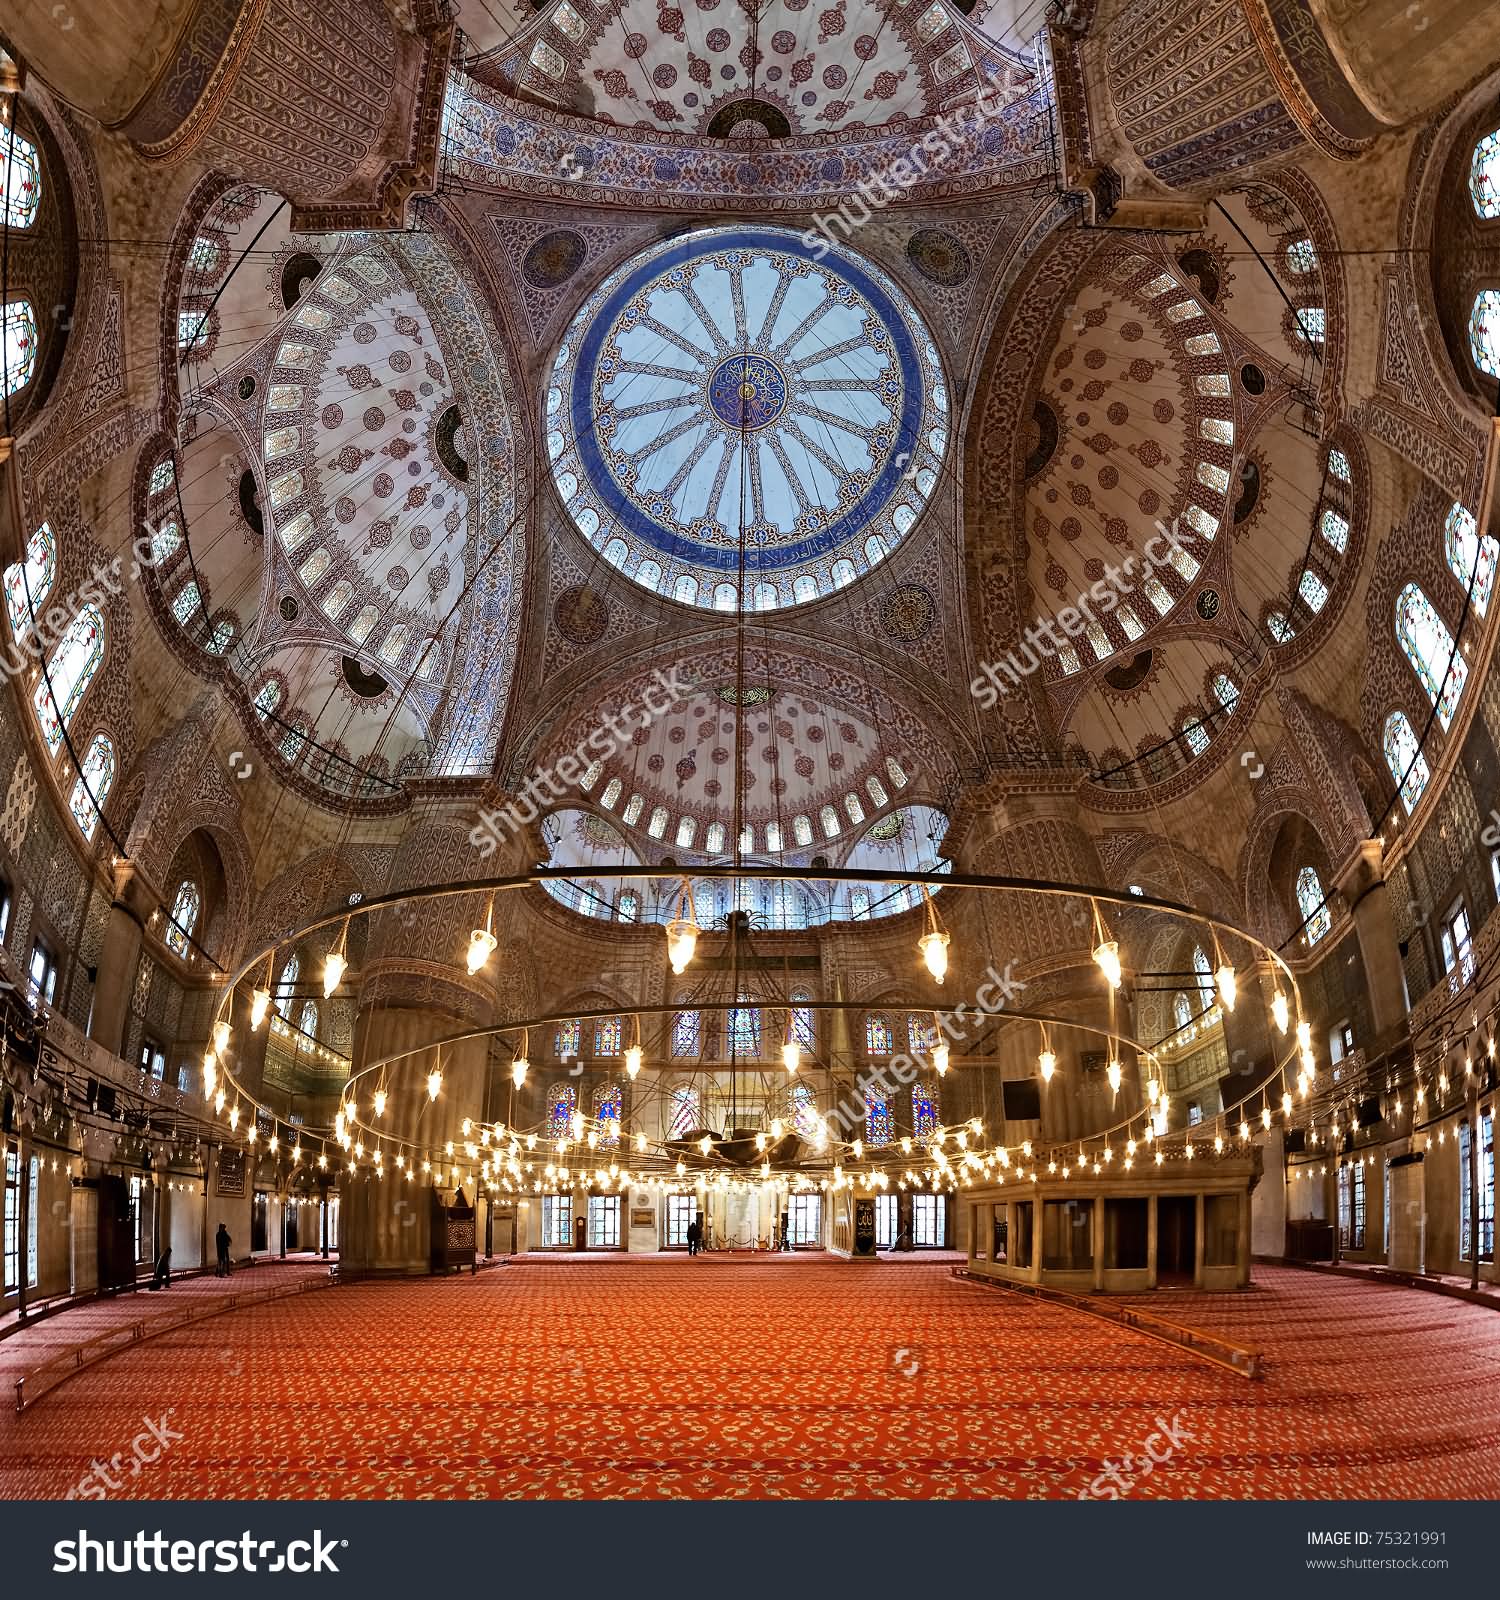 Amazing Architecture Of The Blue Mosque Inside View Picture